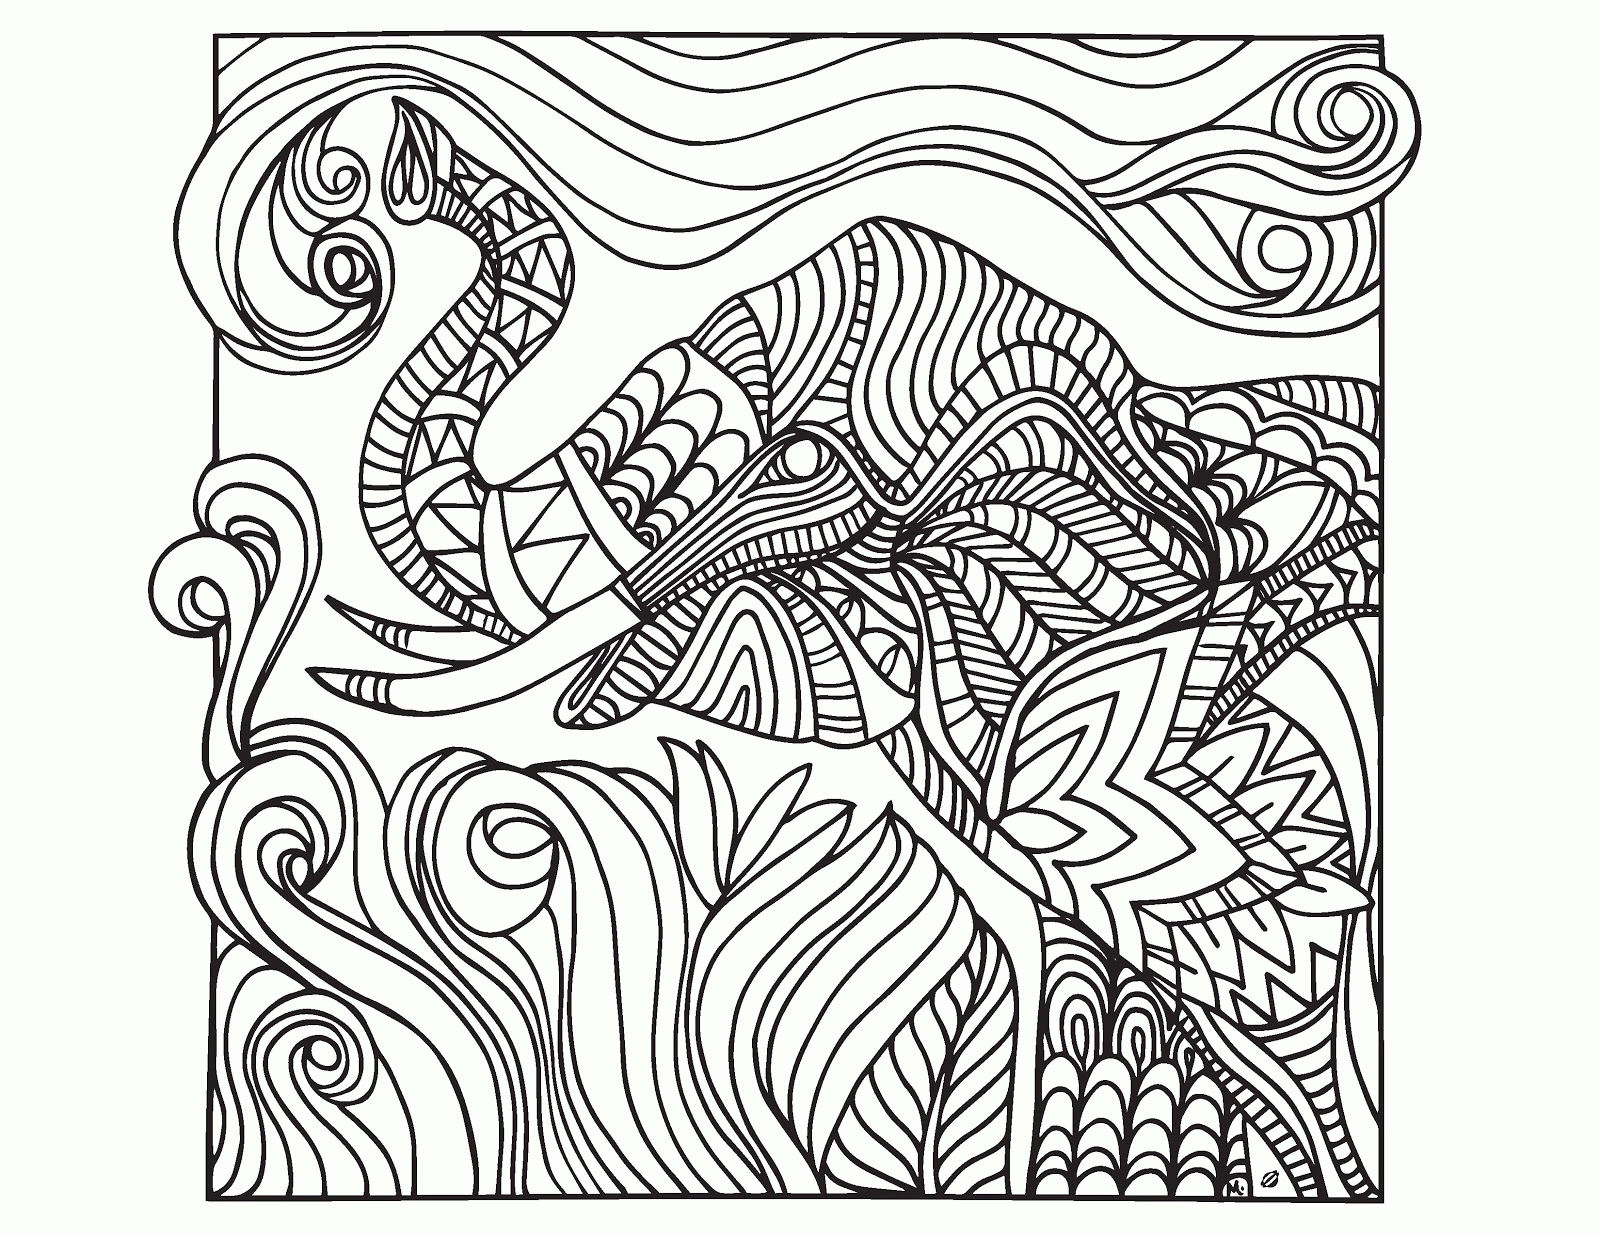 The 21 Best Ideas for Relaxing Coloring Pages for Kids - Home, Family